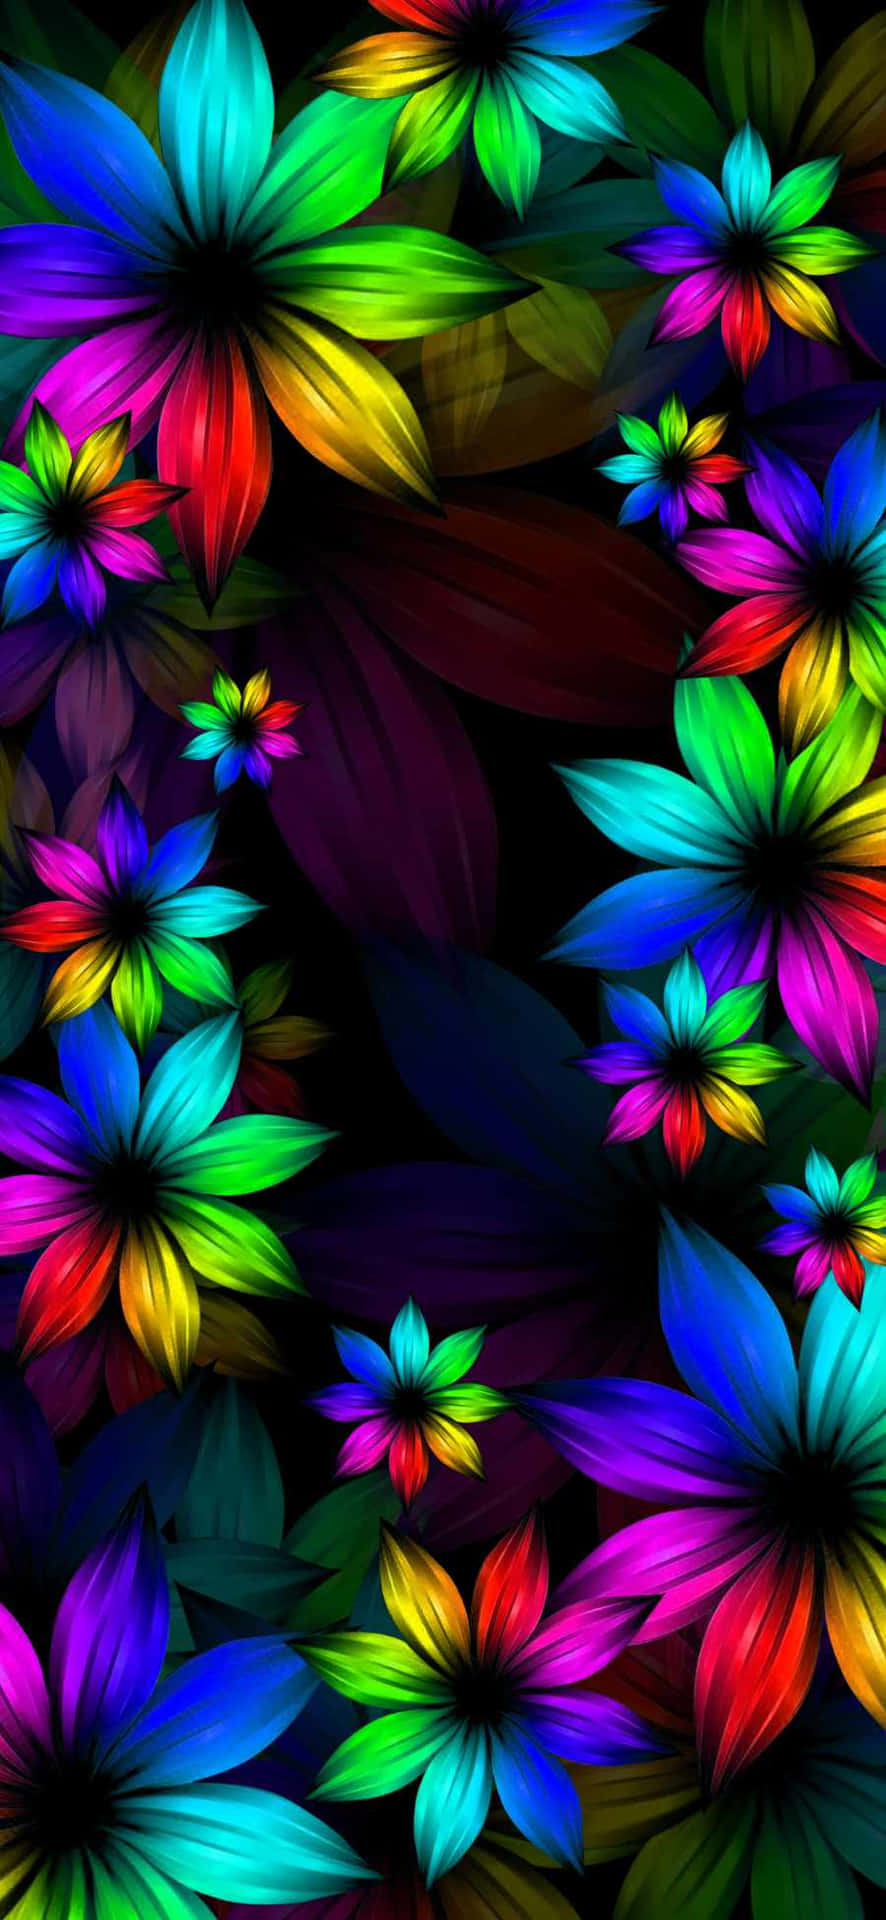 A Colorful Flower Wallpaper On A Black Background Background